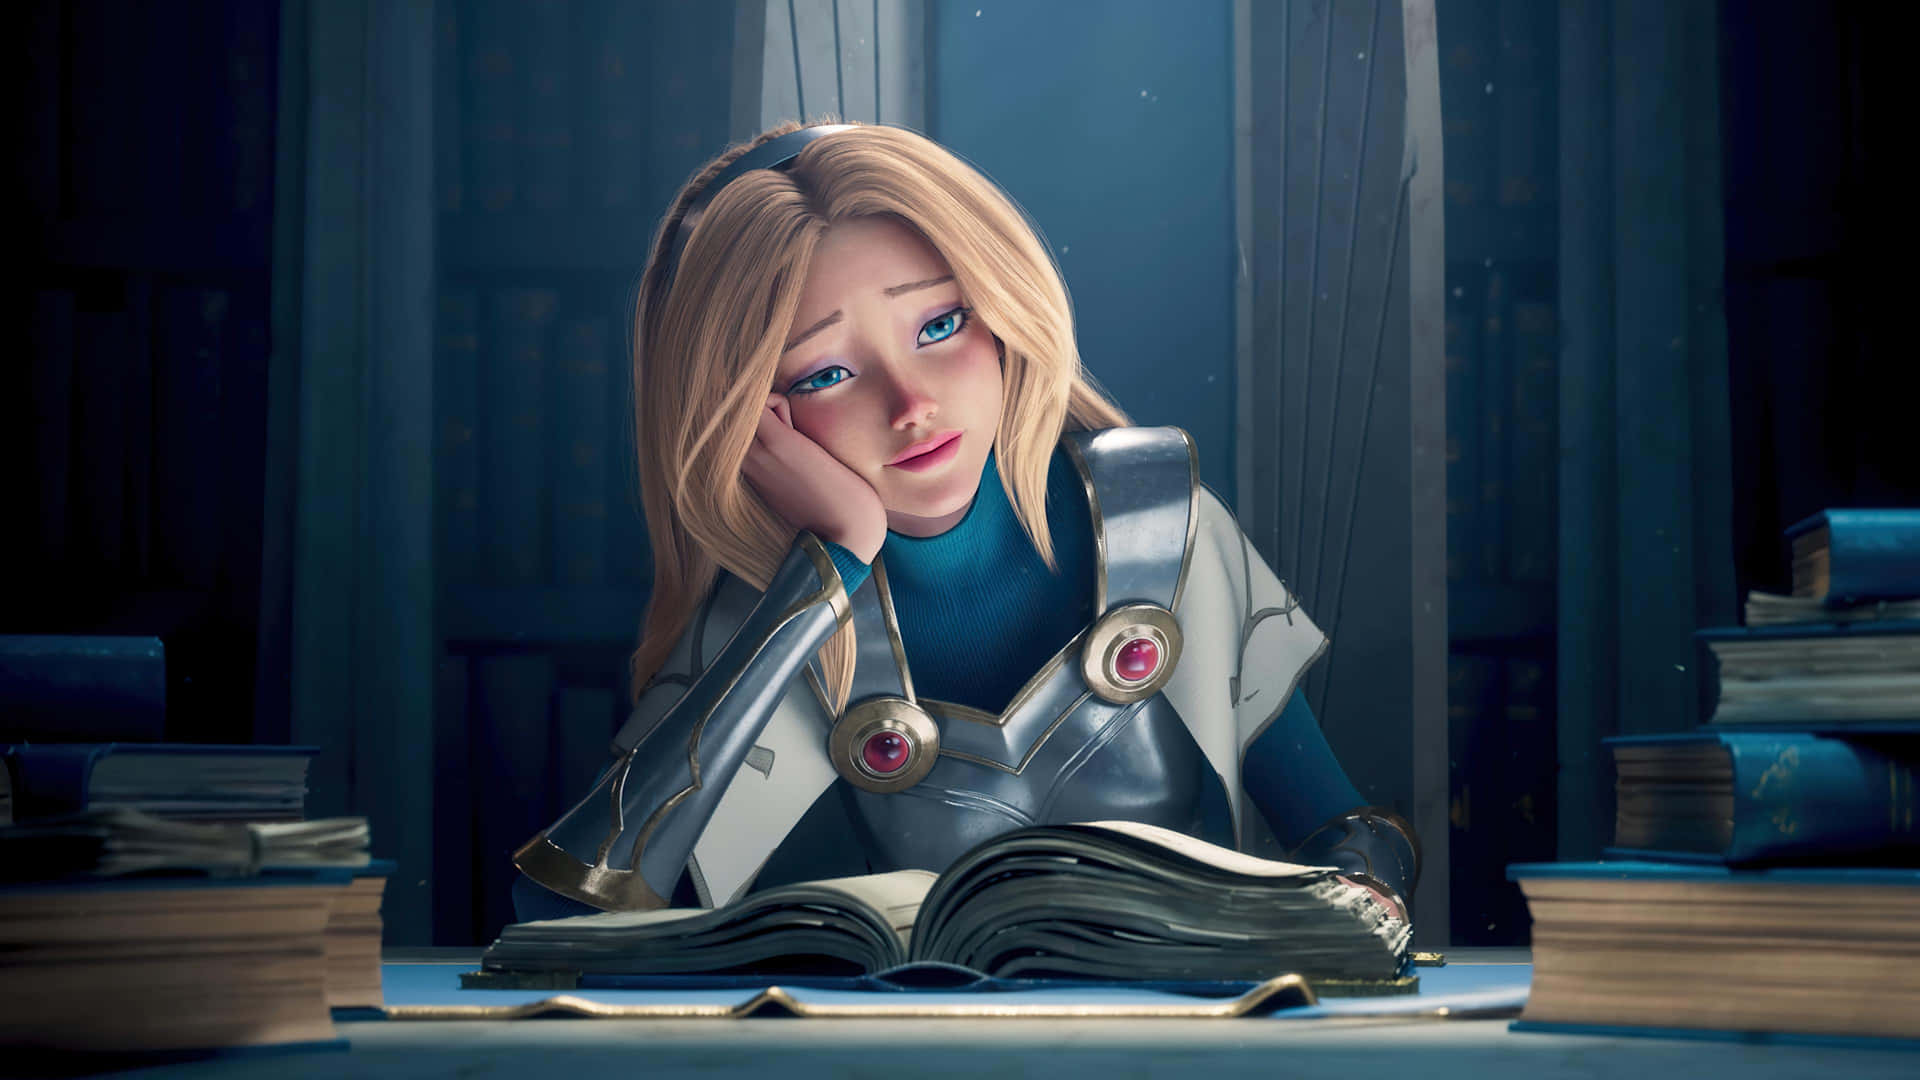 Animated Armored Heroine Studying Wallpaper